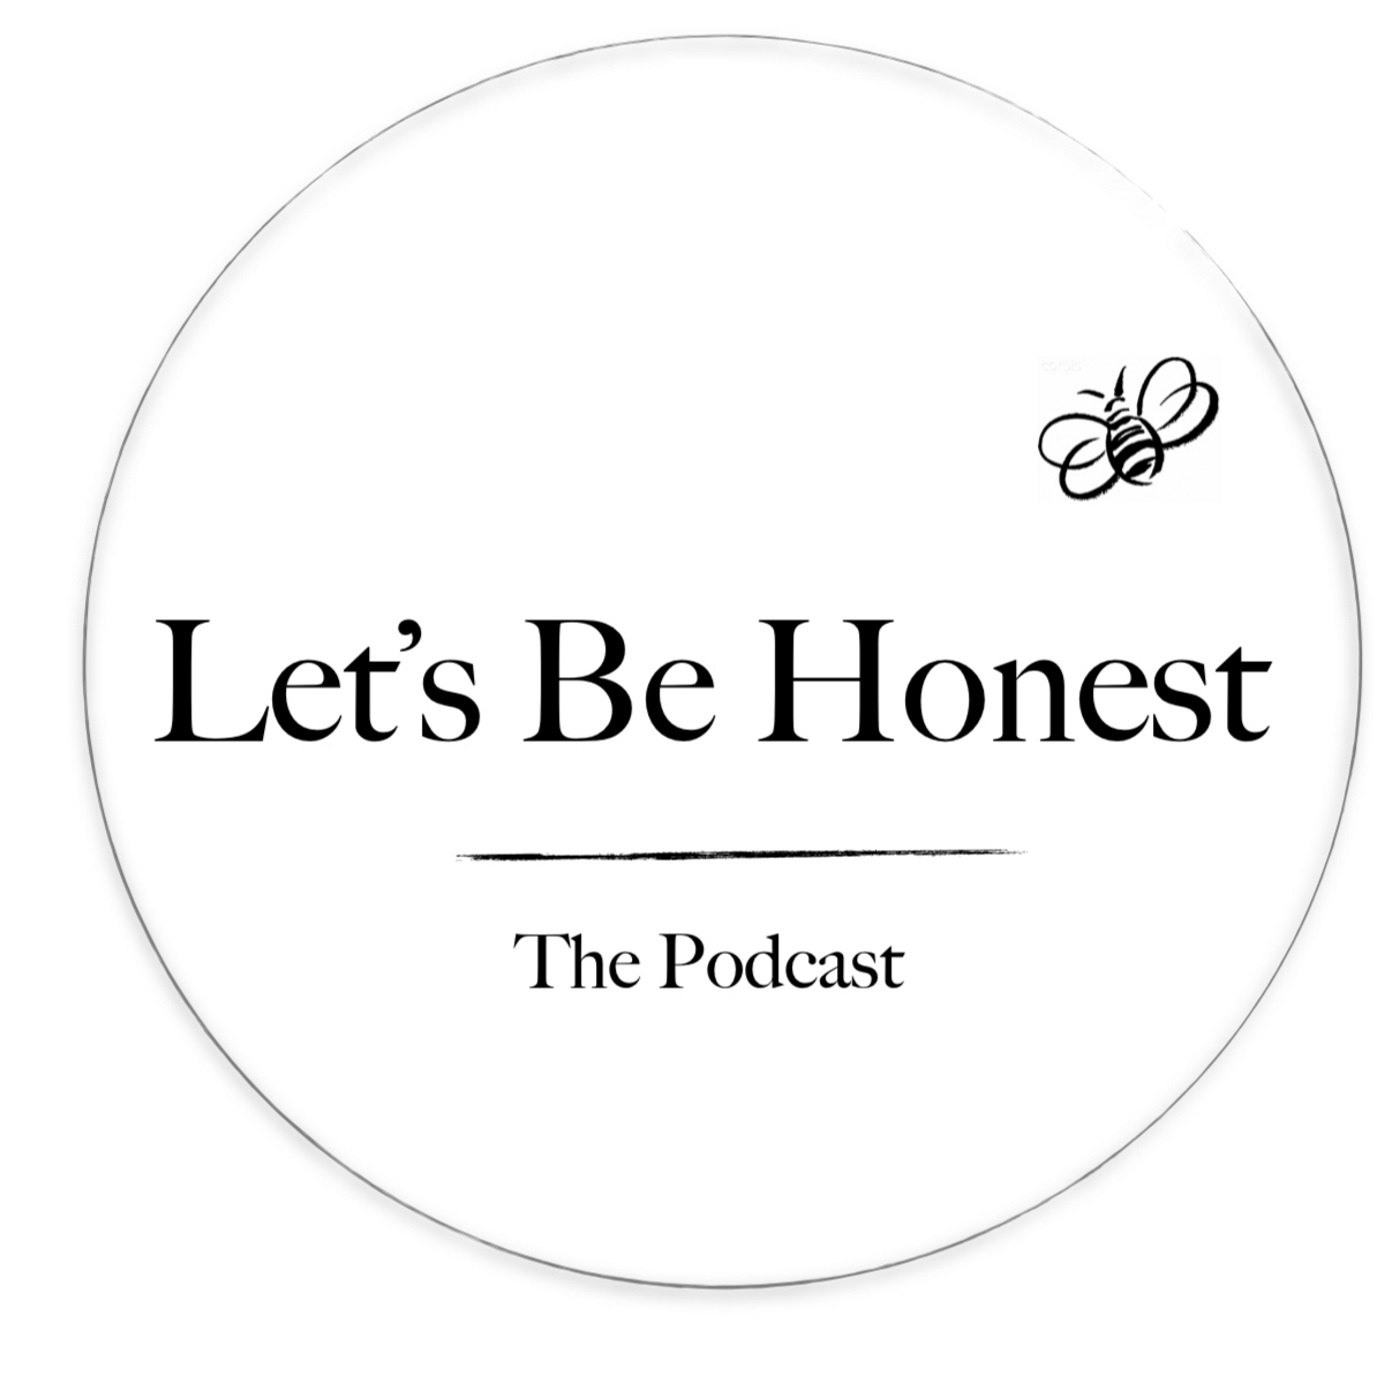 Let's Be Honest The Podcast